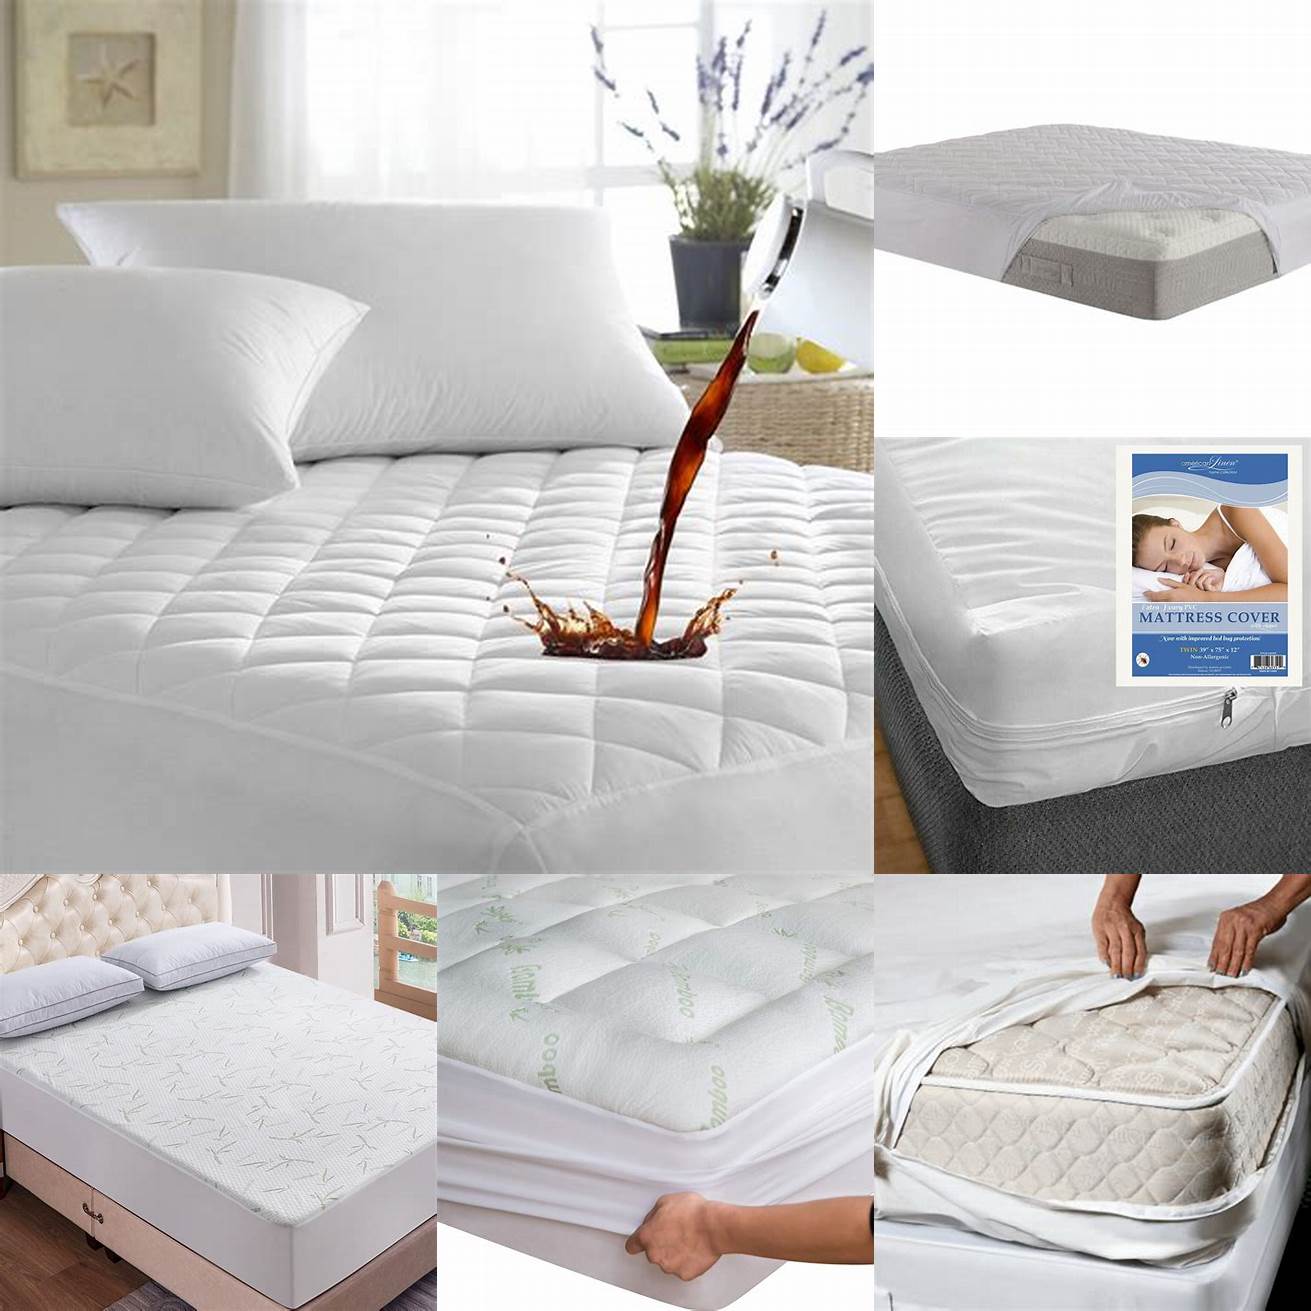 Look for a mattress with a breathable cover to help prevent heat retention